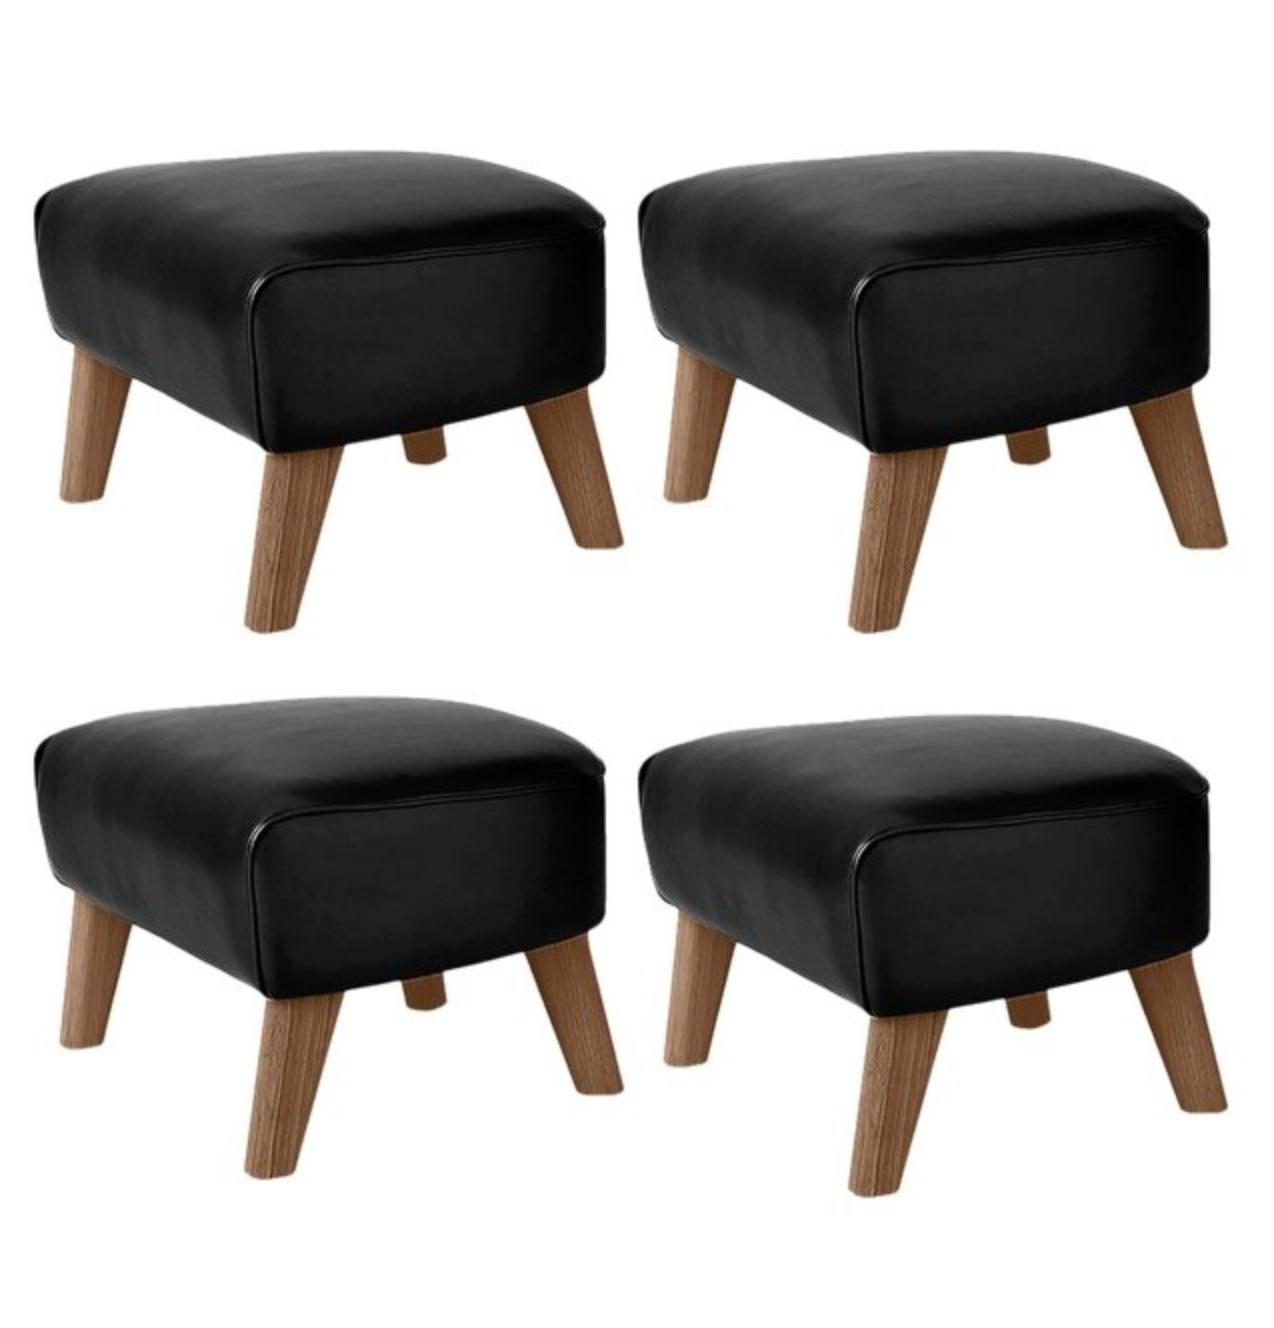 Set Of 4 Black Leather and Smoked Oak My Own Chair Footstools by Lassen
Dimensions: W 56 x D 58 x H 40 cm 
Materials: Leather

The My Own Chair Footstool has been designed in the same spirit as Flemming Lassen’s original iconic chair, reflecting